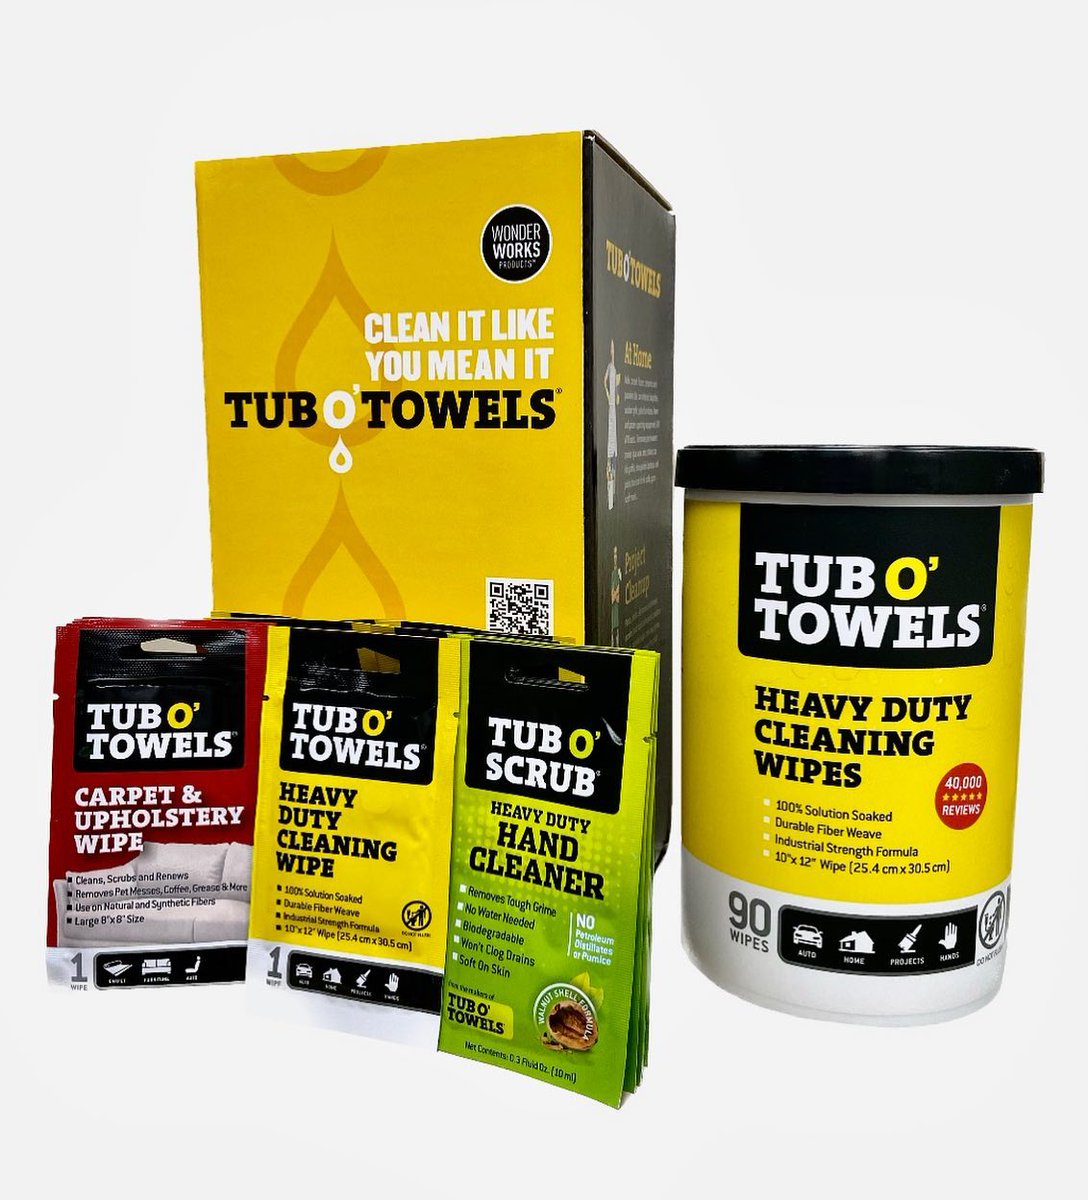 With an industrial strength formula, FedPro’s Tub O’Towels, is a fan favorite!

Perfect for at home, project cleanups, and on the job.

Check out the link below for more information ⬇️
tubotowels.com